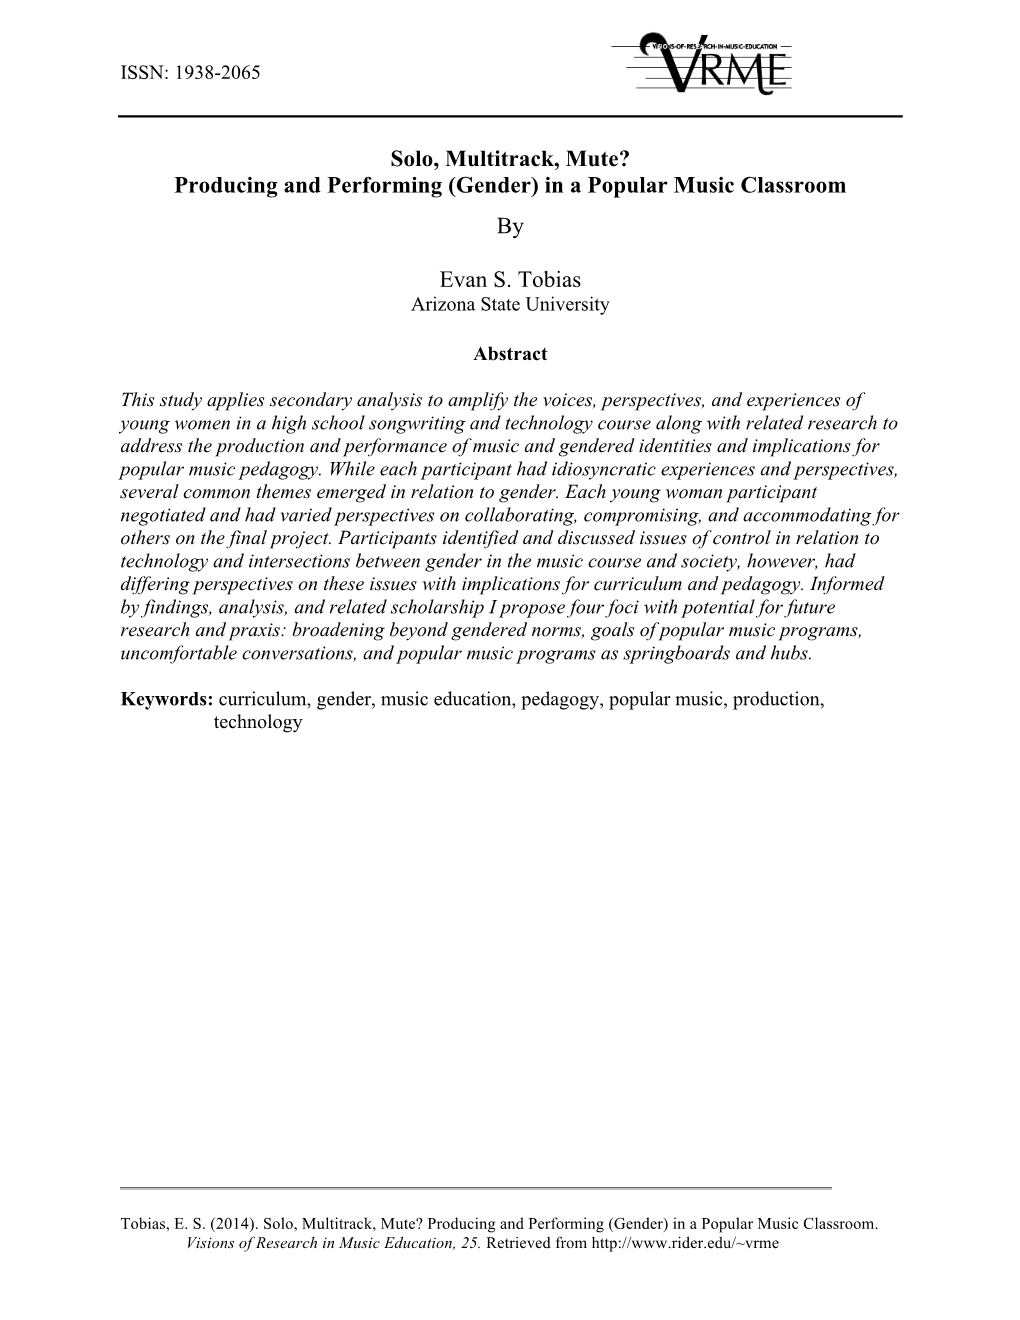 Producing and Performing (Gender) in a Popular Music Classroom By